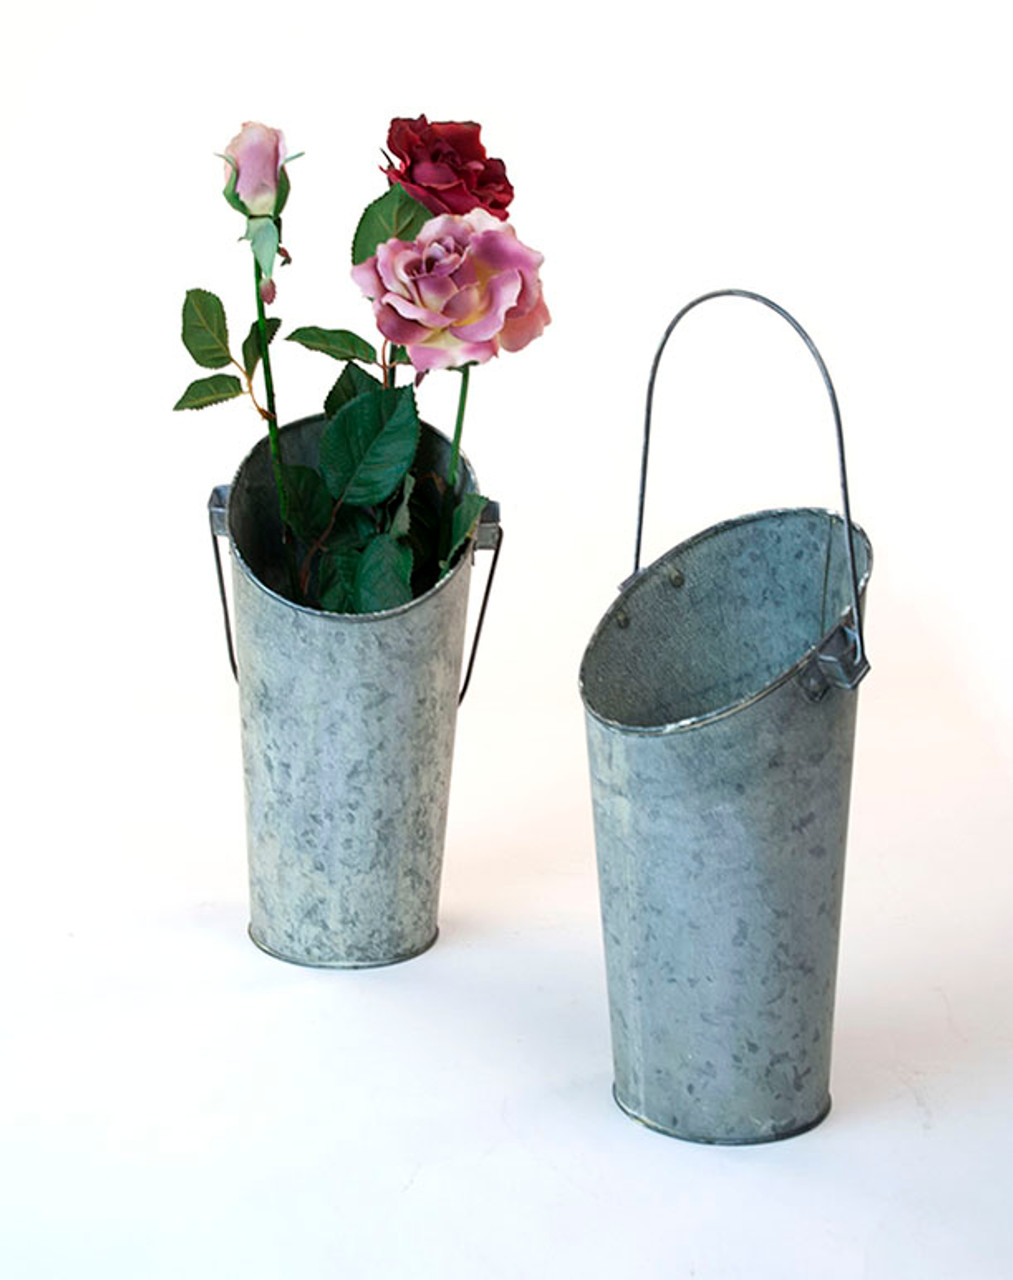 Buckets, Pails and Tubs in Vintage, Colored and Galvanized Finish